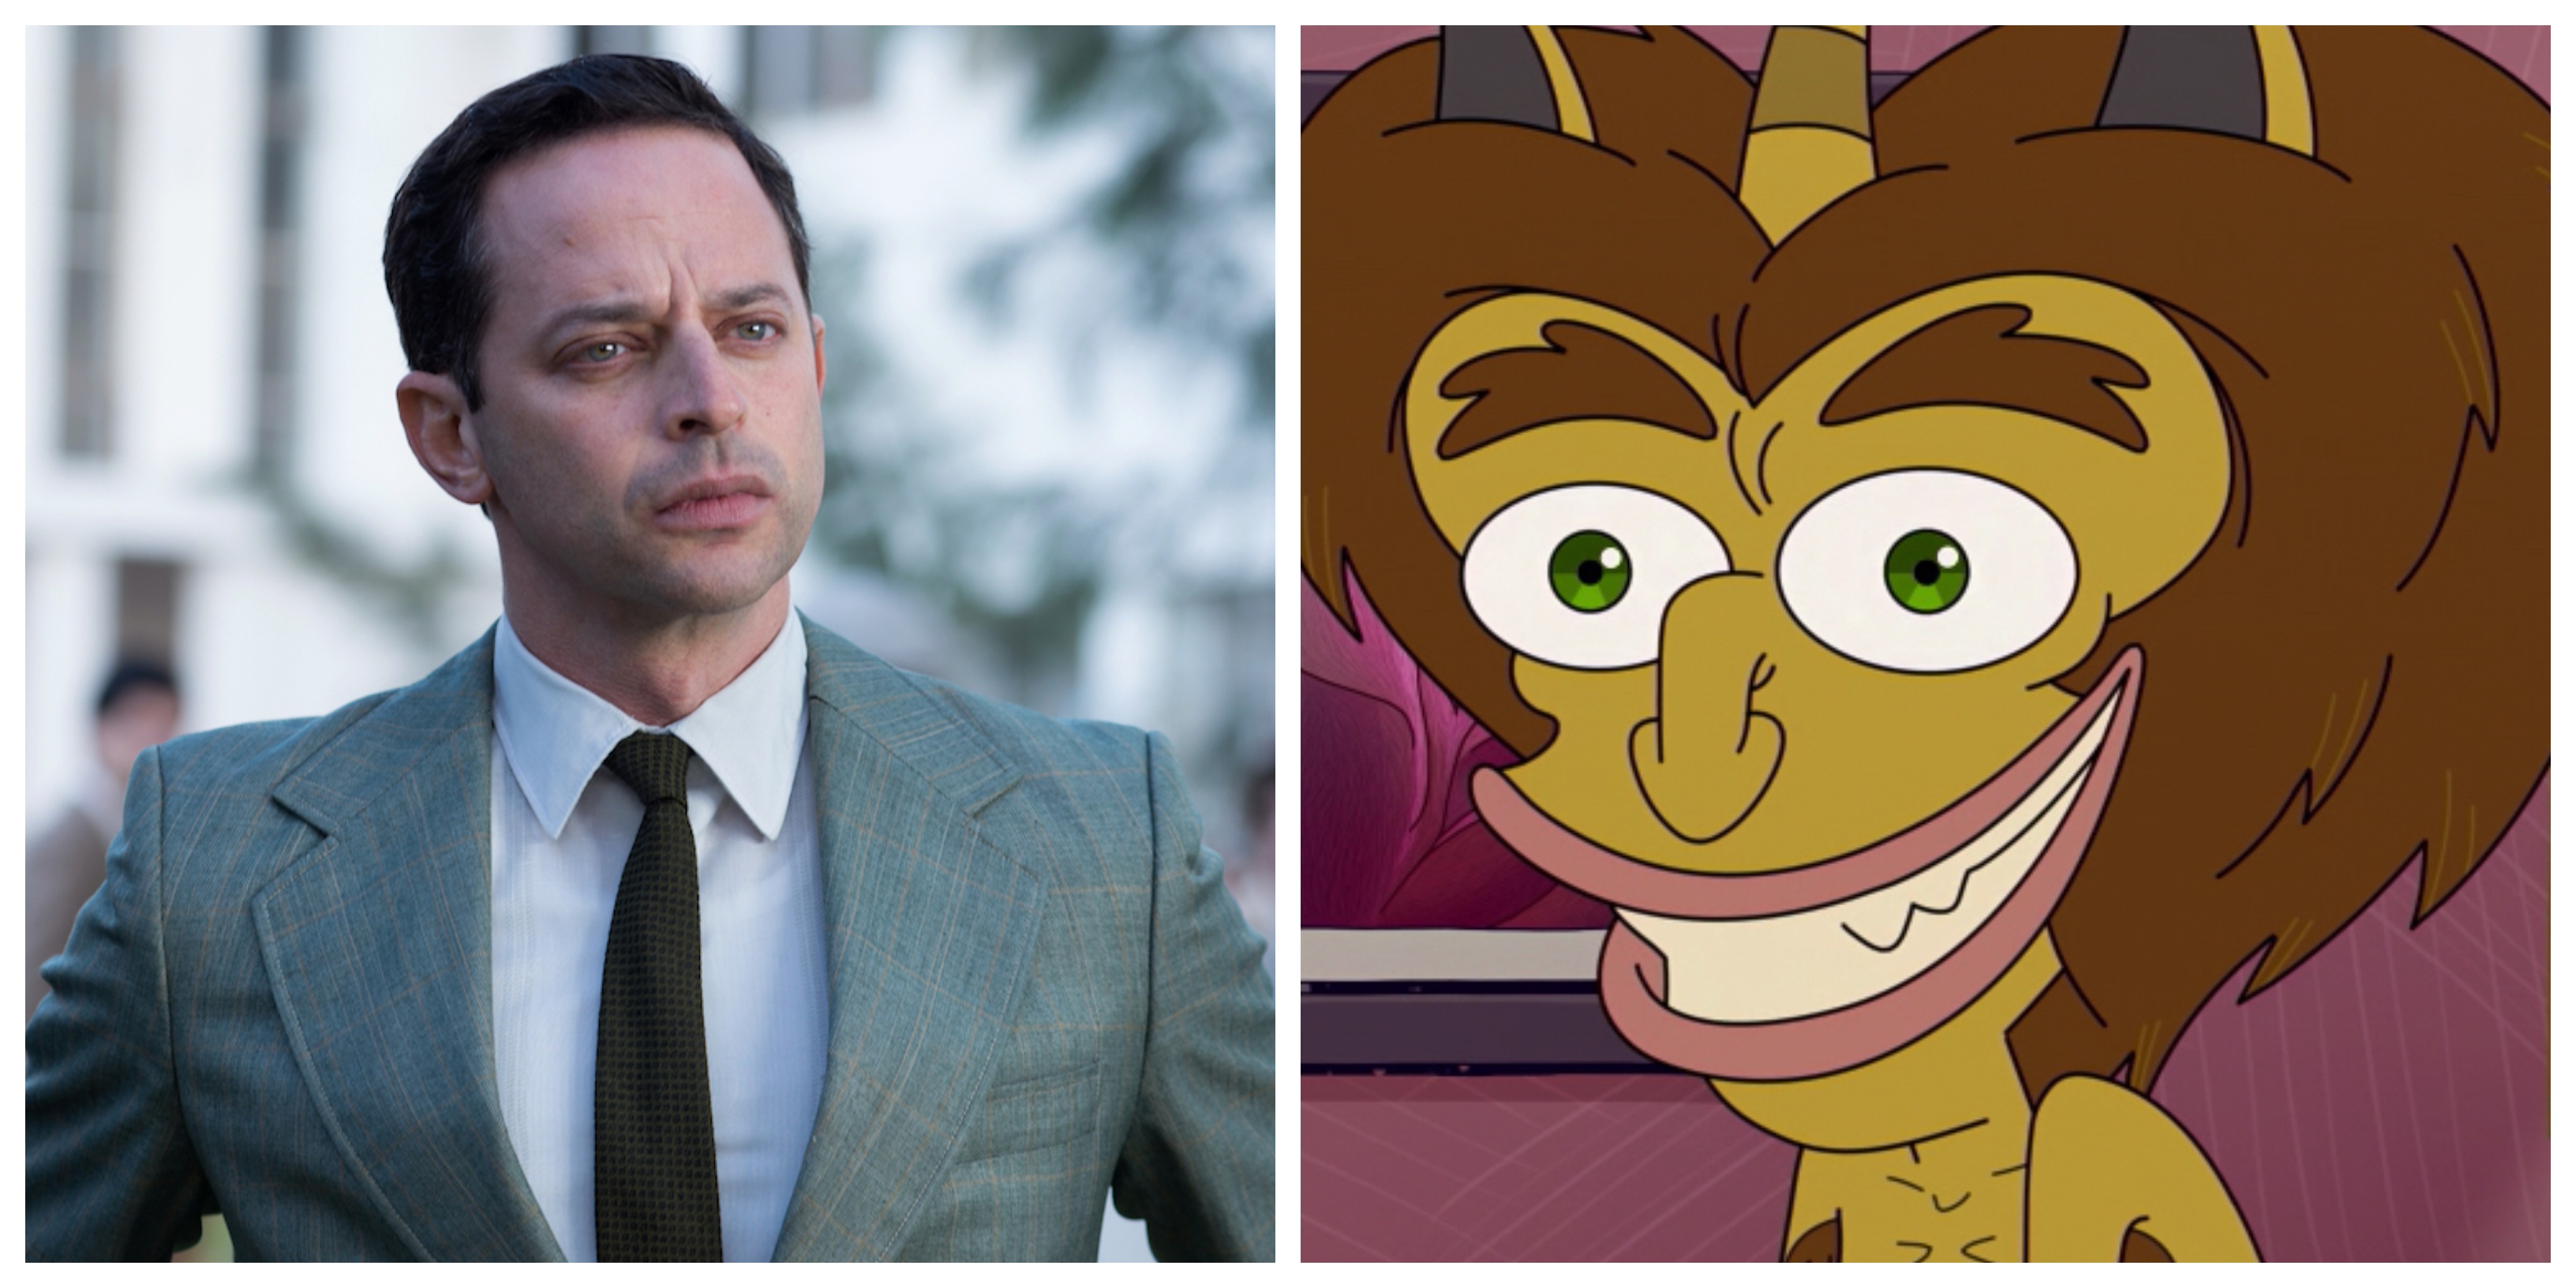 Human Resources Voice Cast - Nick Kroll as Maury the Hormone Monster